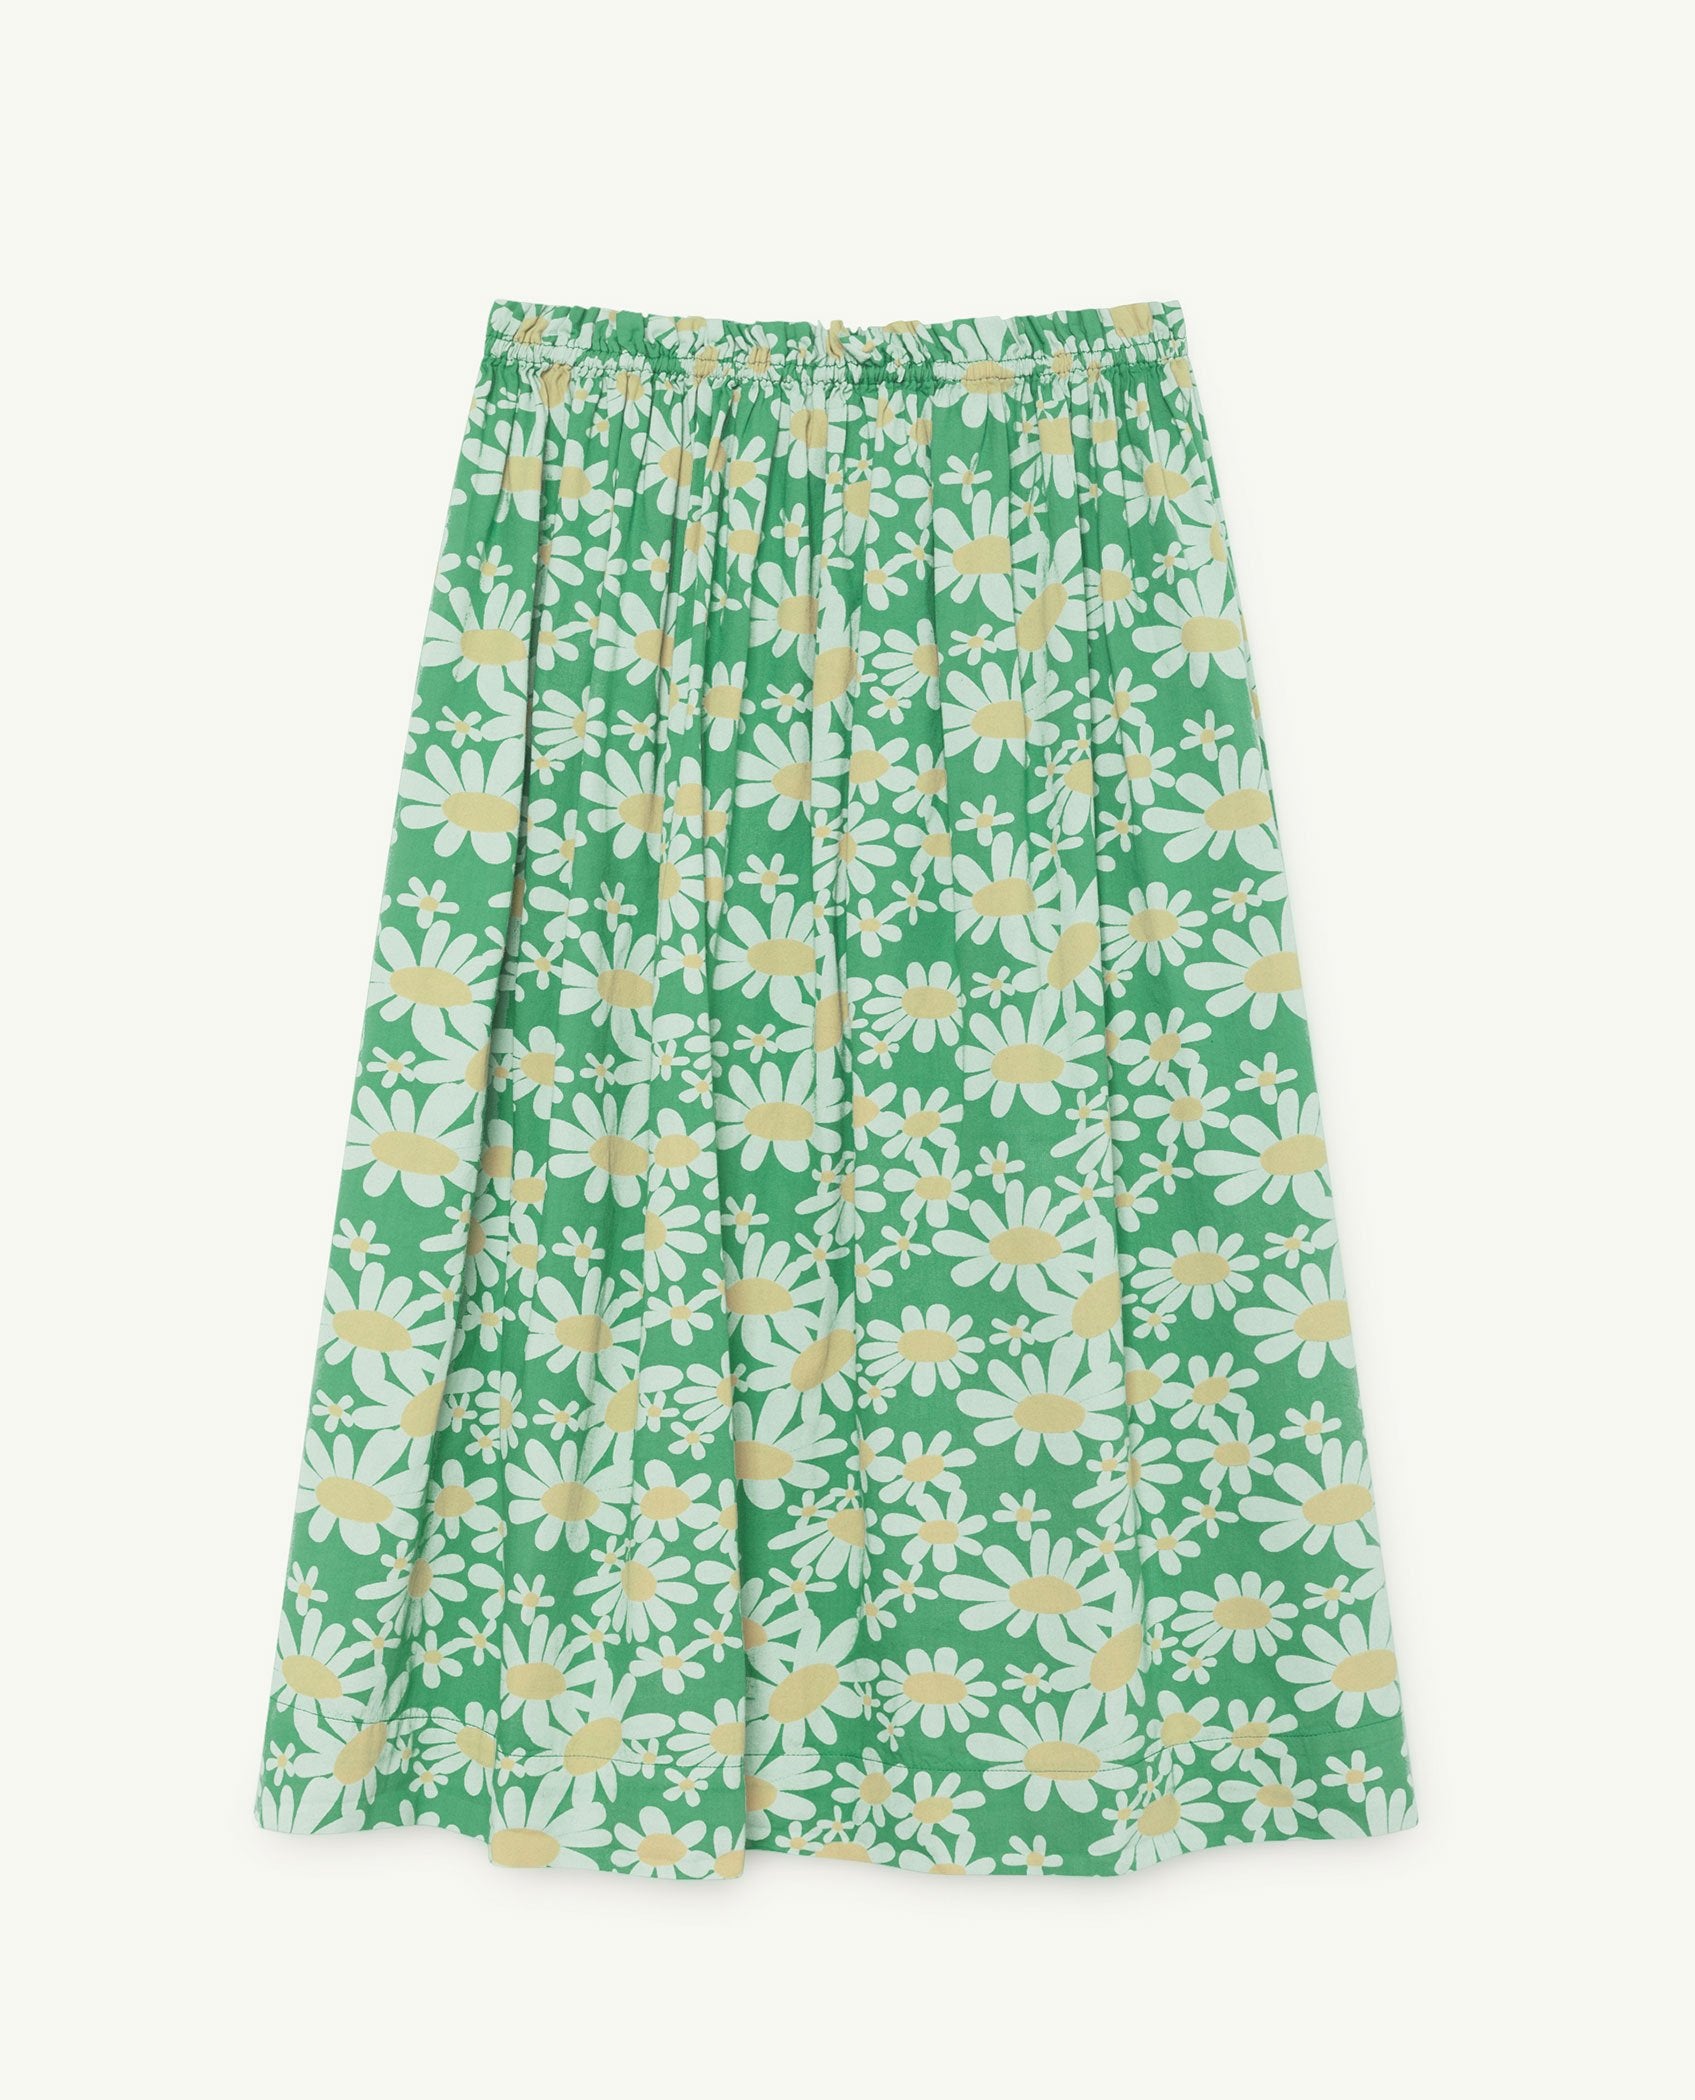 Green Blowfish Skirt PRODUCT FRONT